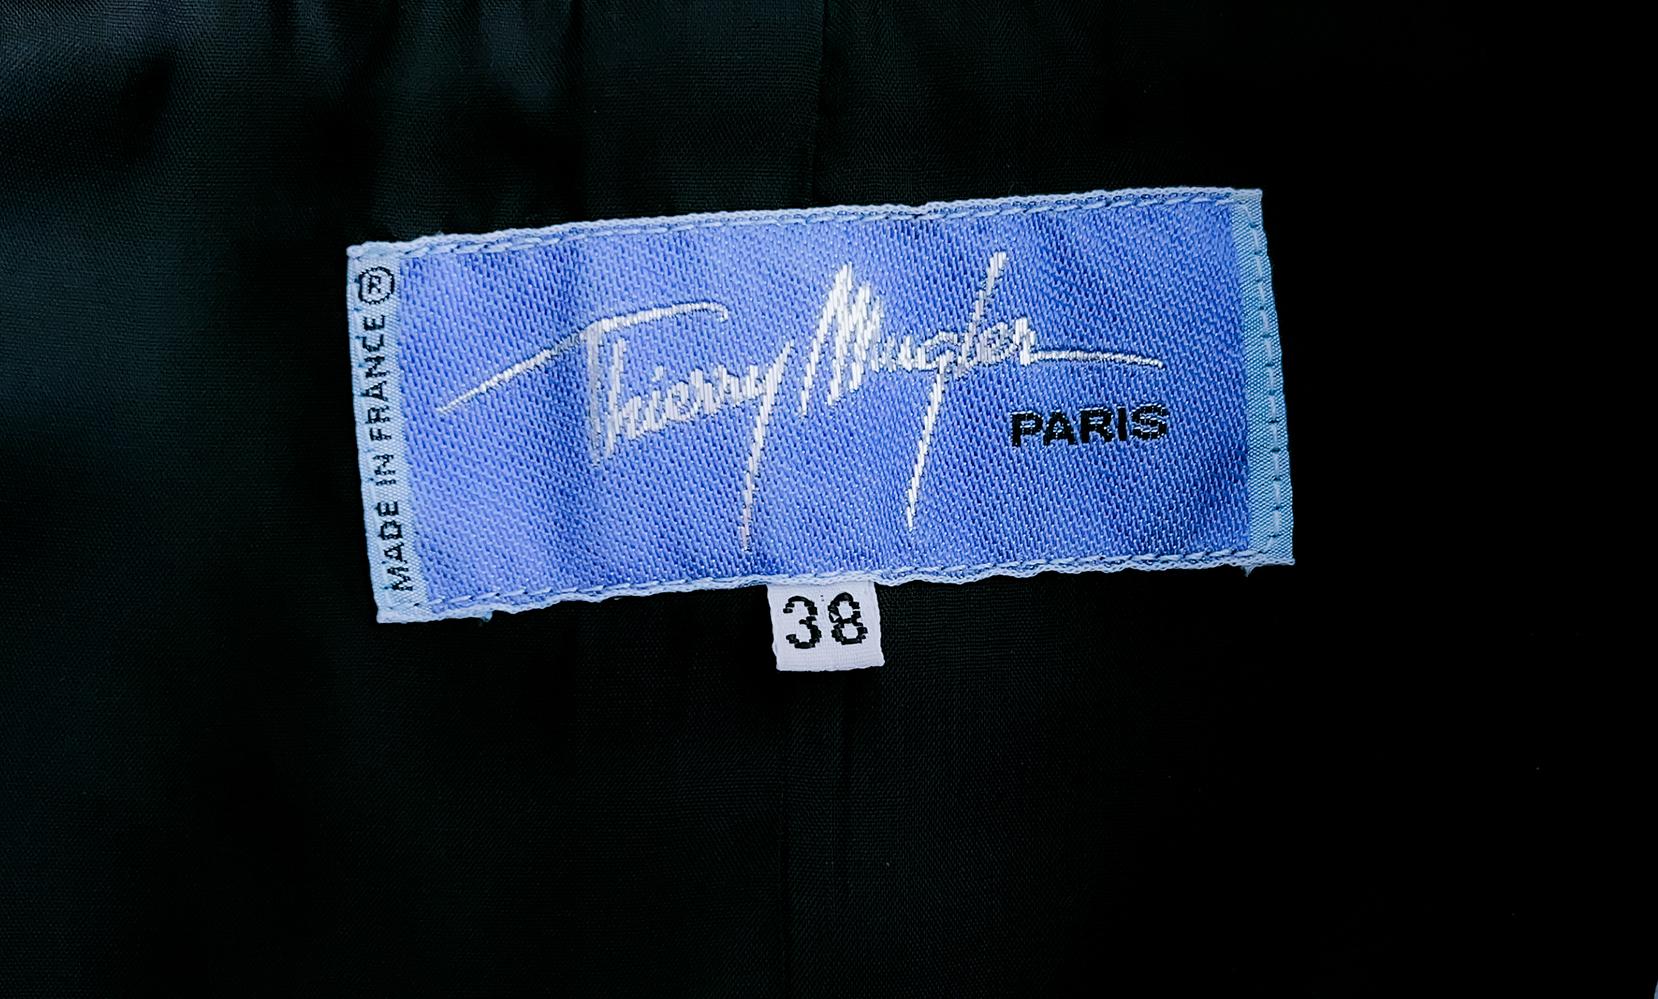 Thierry Mugler SS1994 Archival Iconic Runway Suit Sculptural ZigZag Jacket Skirt For Sale 7